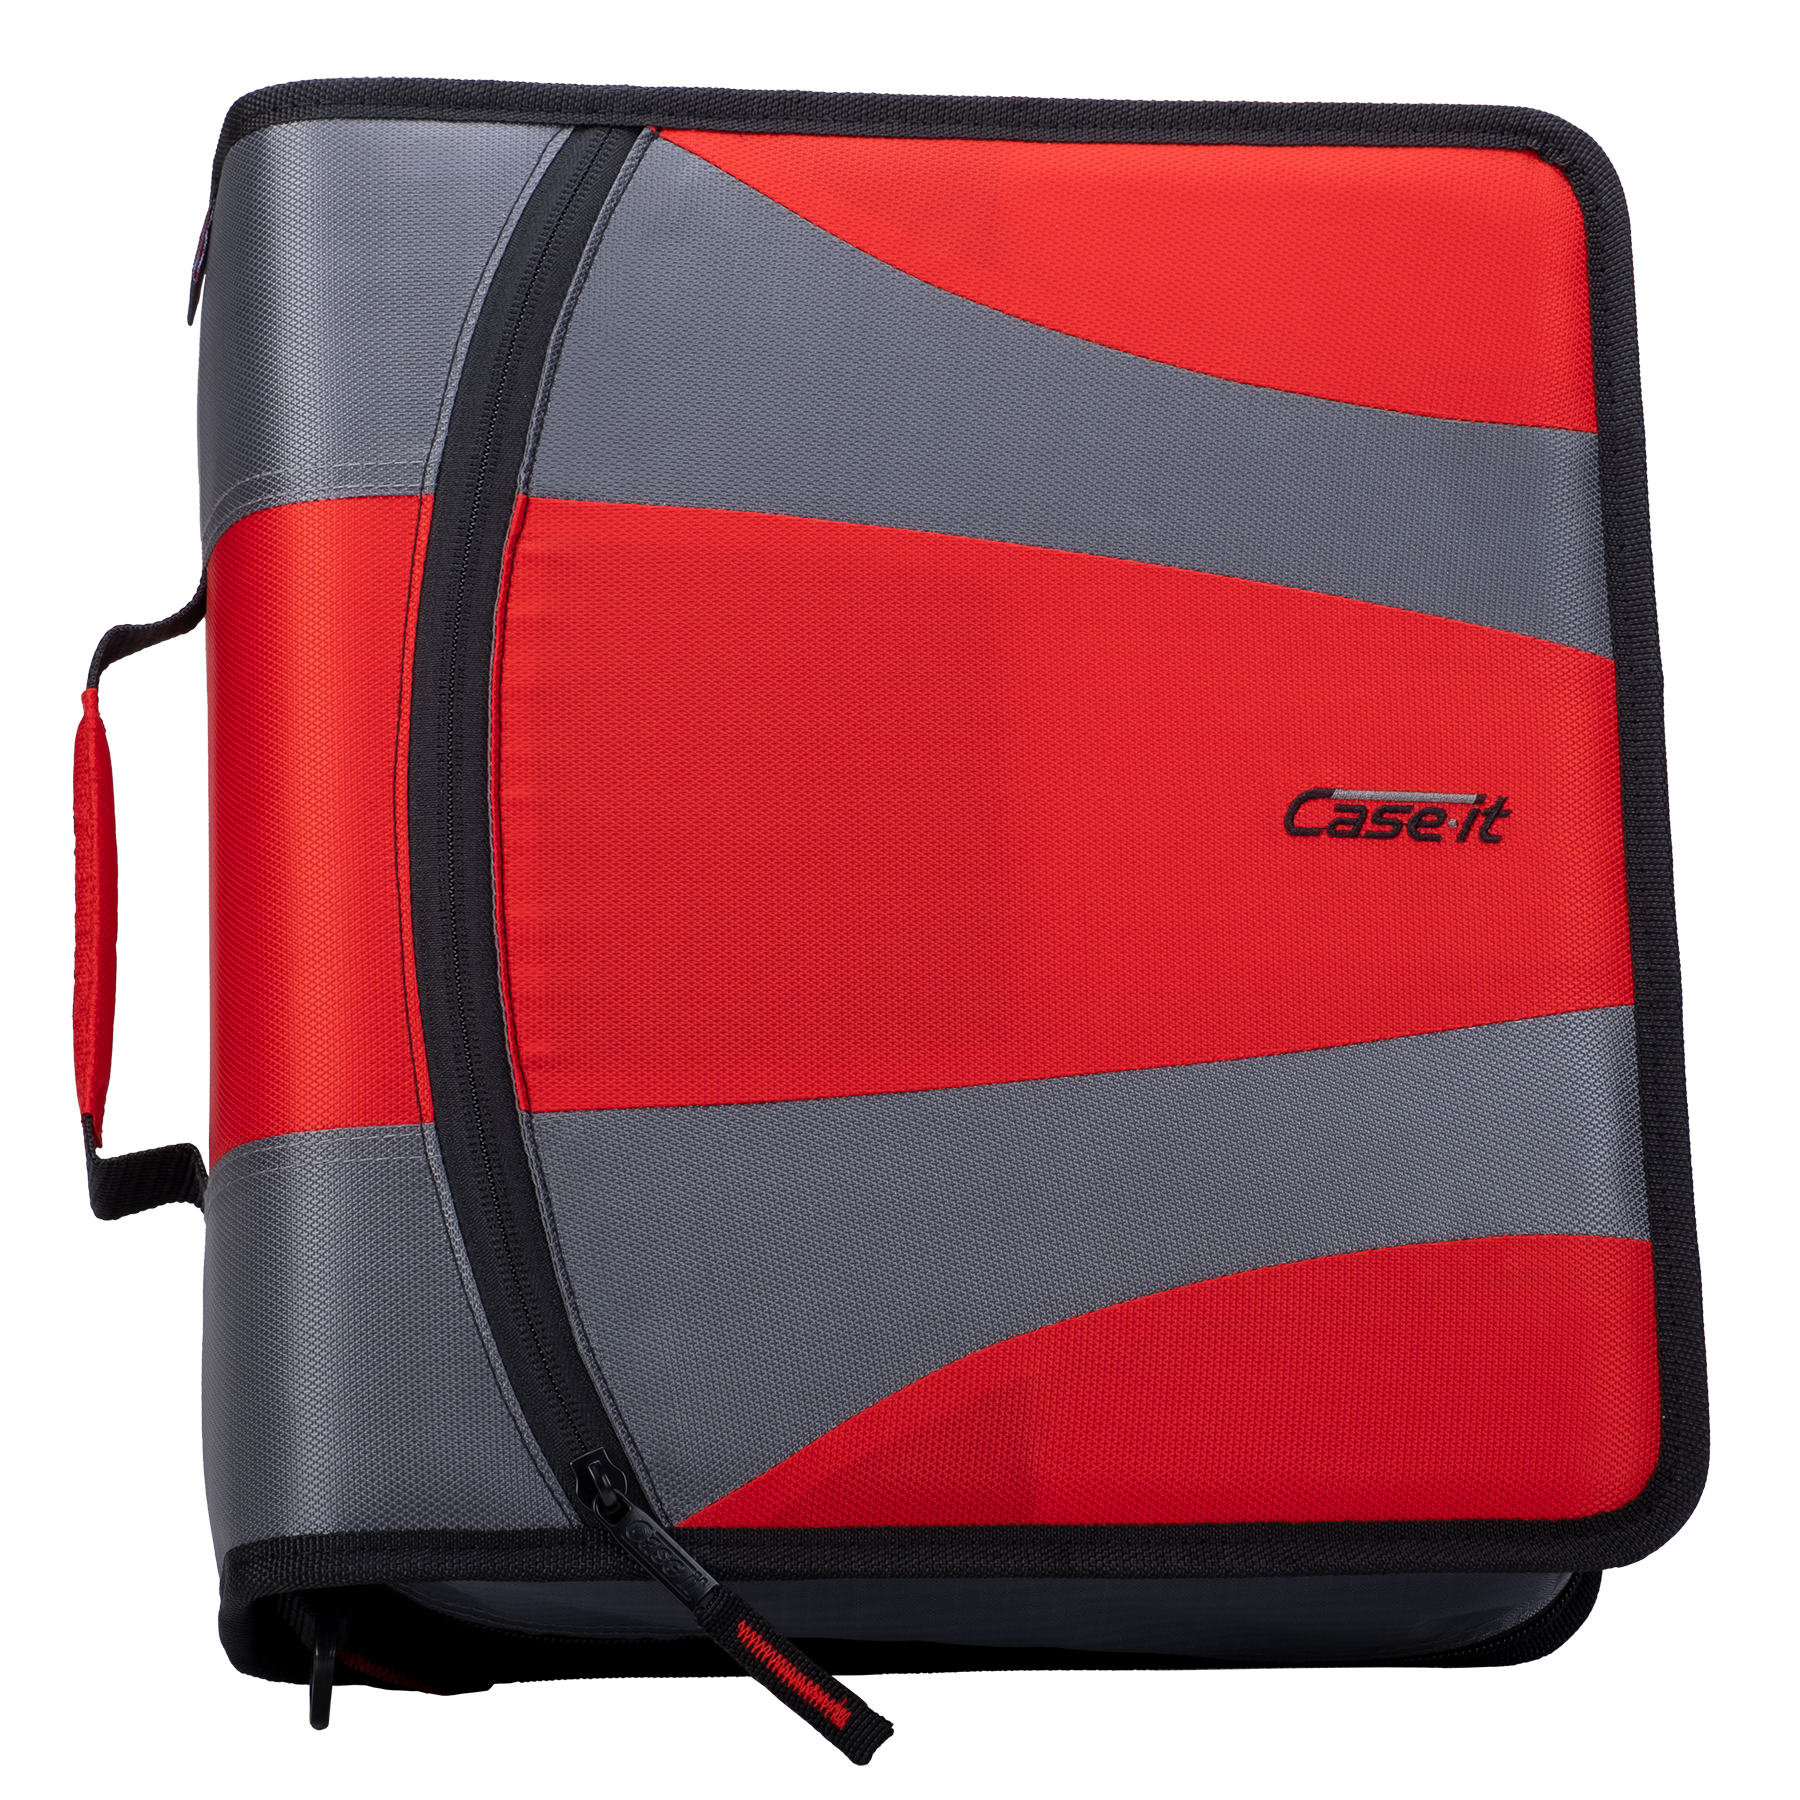 Case•it Dual-121-a, Binder 2-in-1 Zipper Binder, Black, Assembled product  height 13 x depth 3.14 x width 12.99, Handle and shoulder strap 